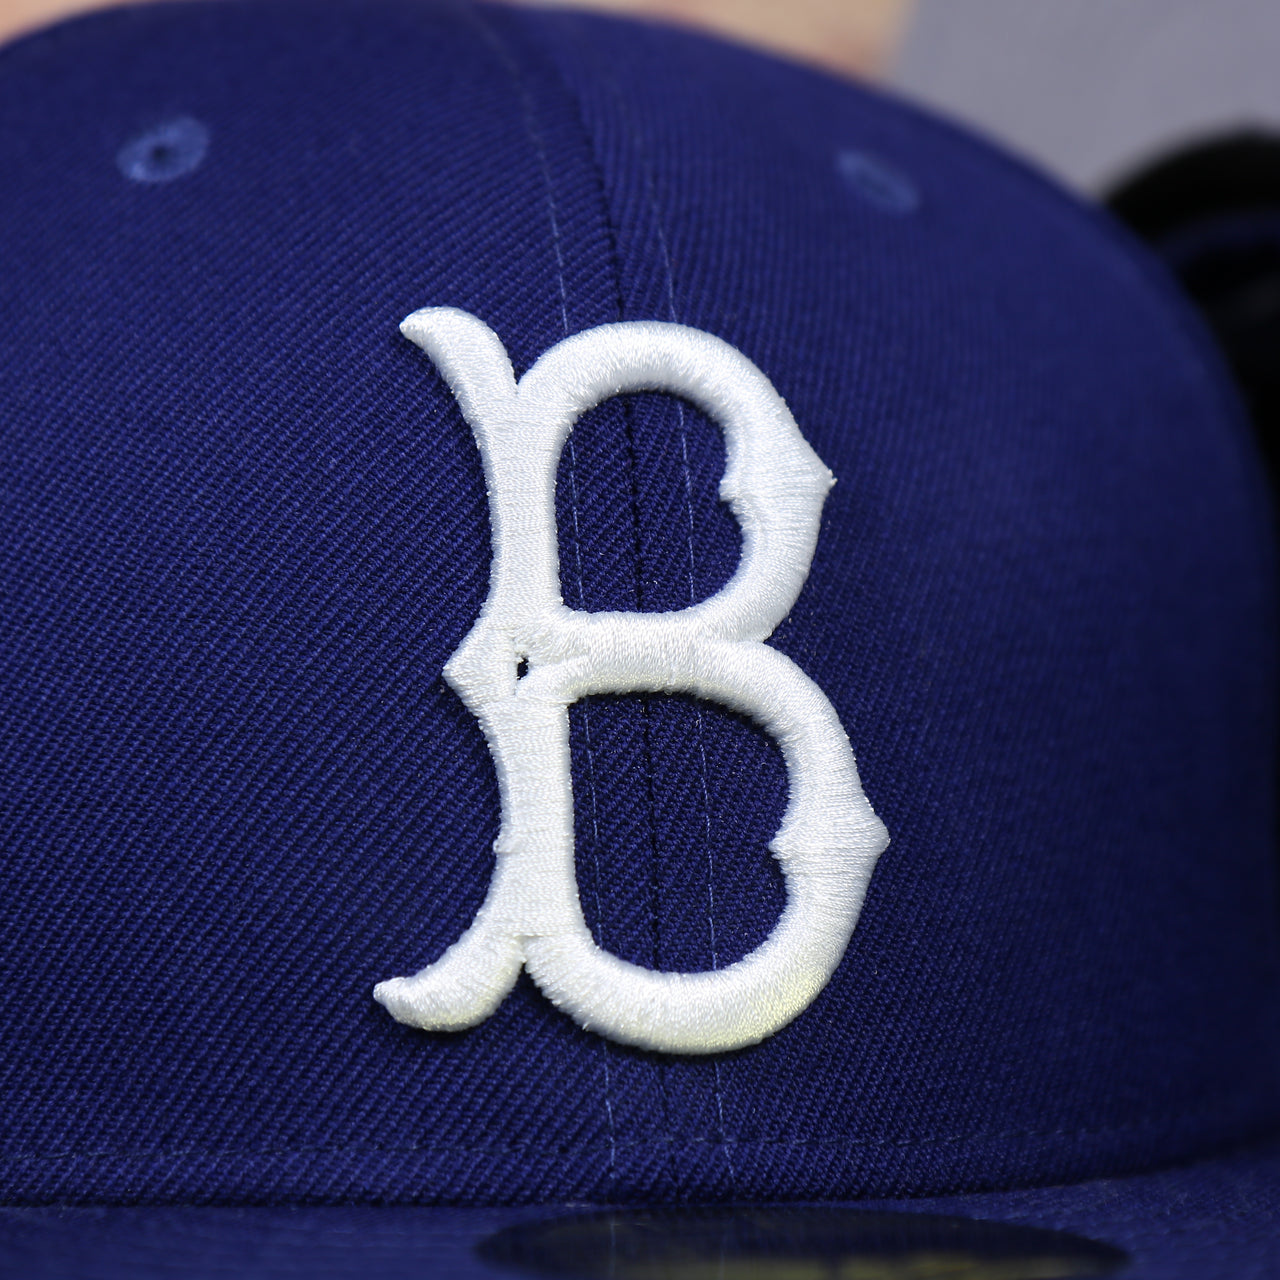 dodgers logo on the Brooklyn Dodgers Royal Blue Grey Bottom Fitted Hat | Royal Blue New Era Grey Brim 59fifty | Dodgers Gray Underbrim Fitted Cap